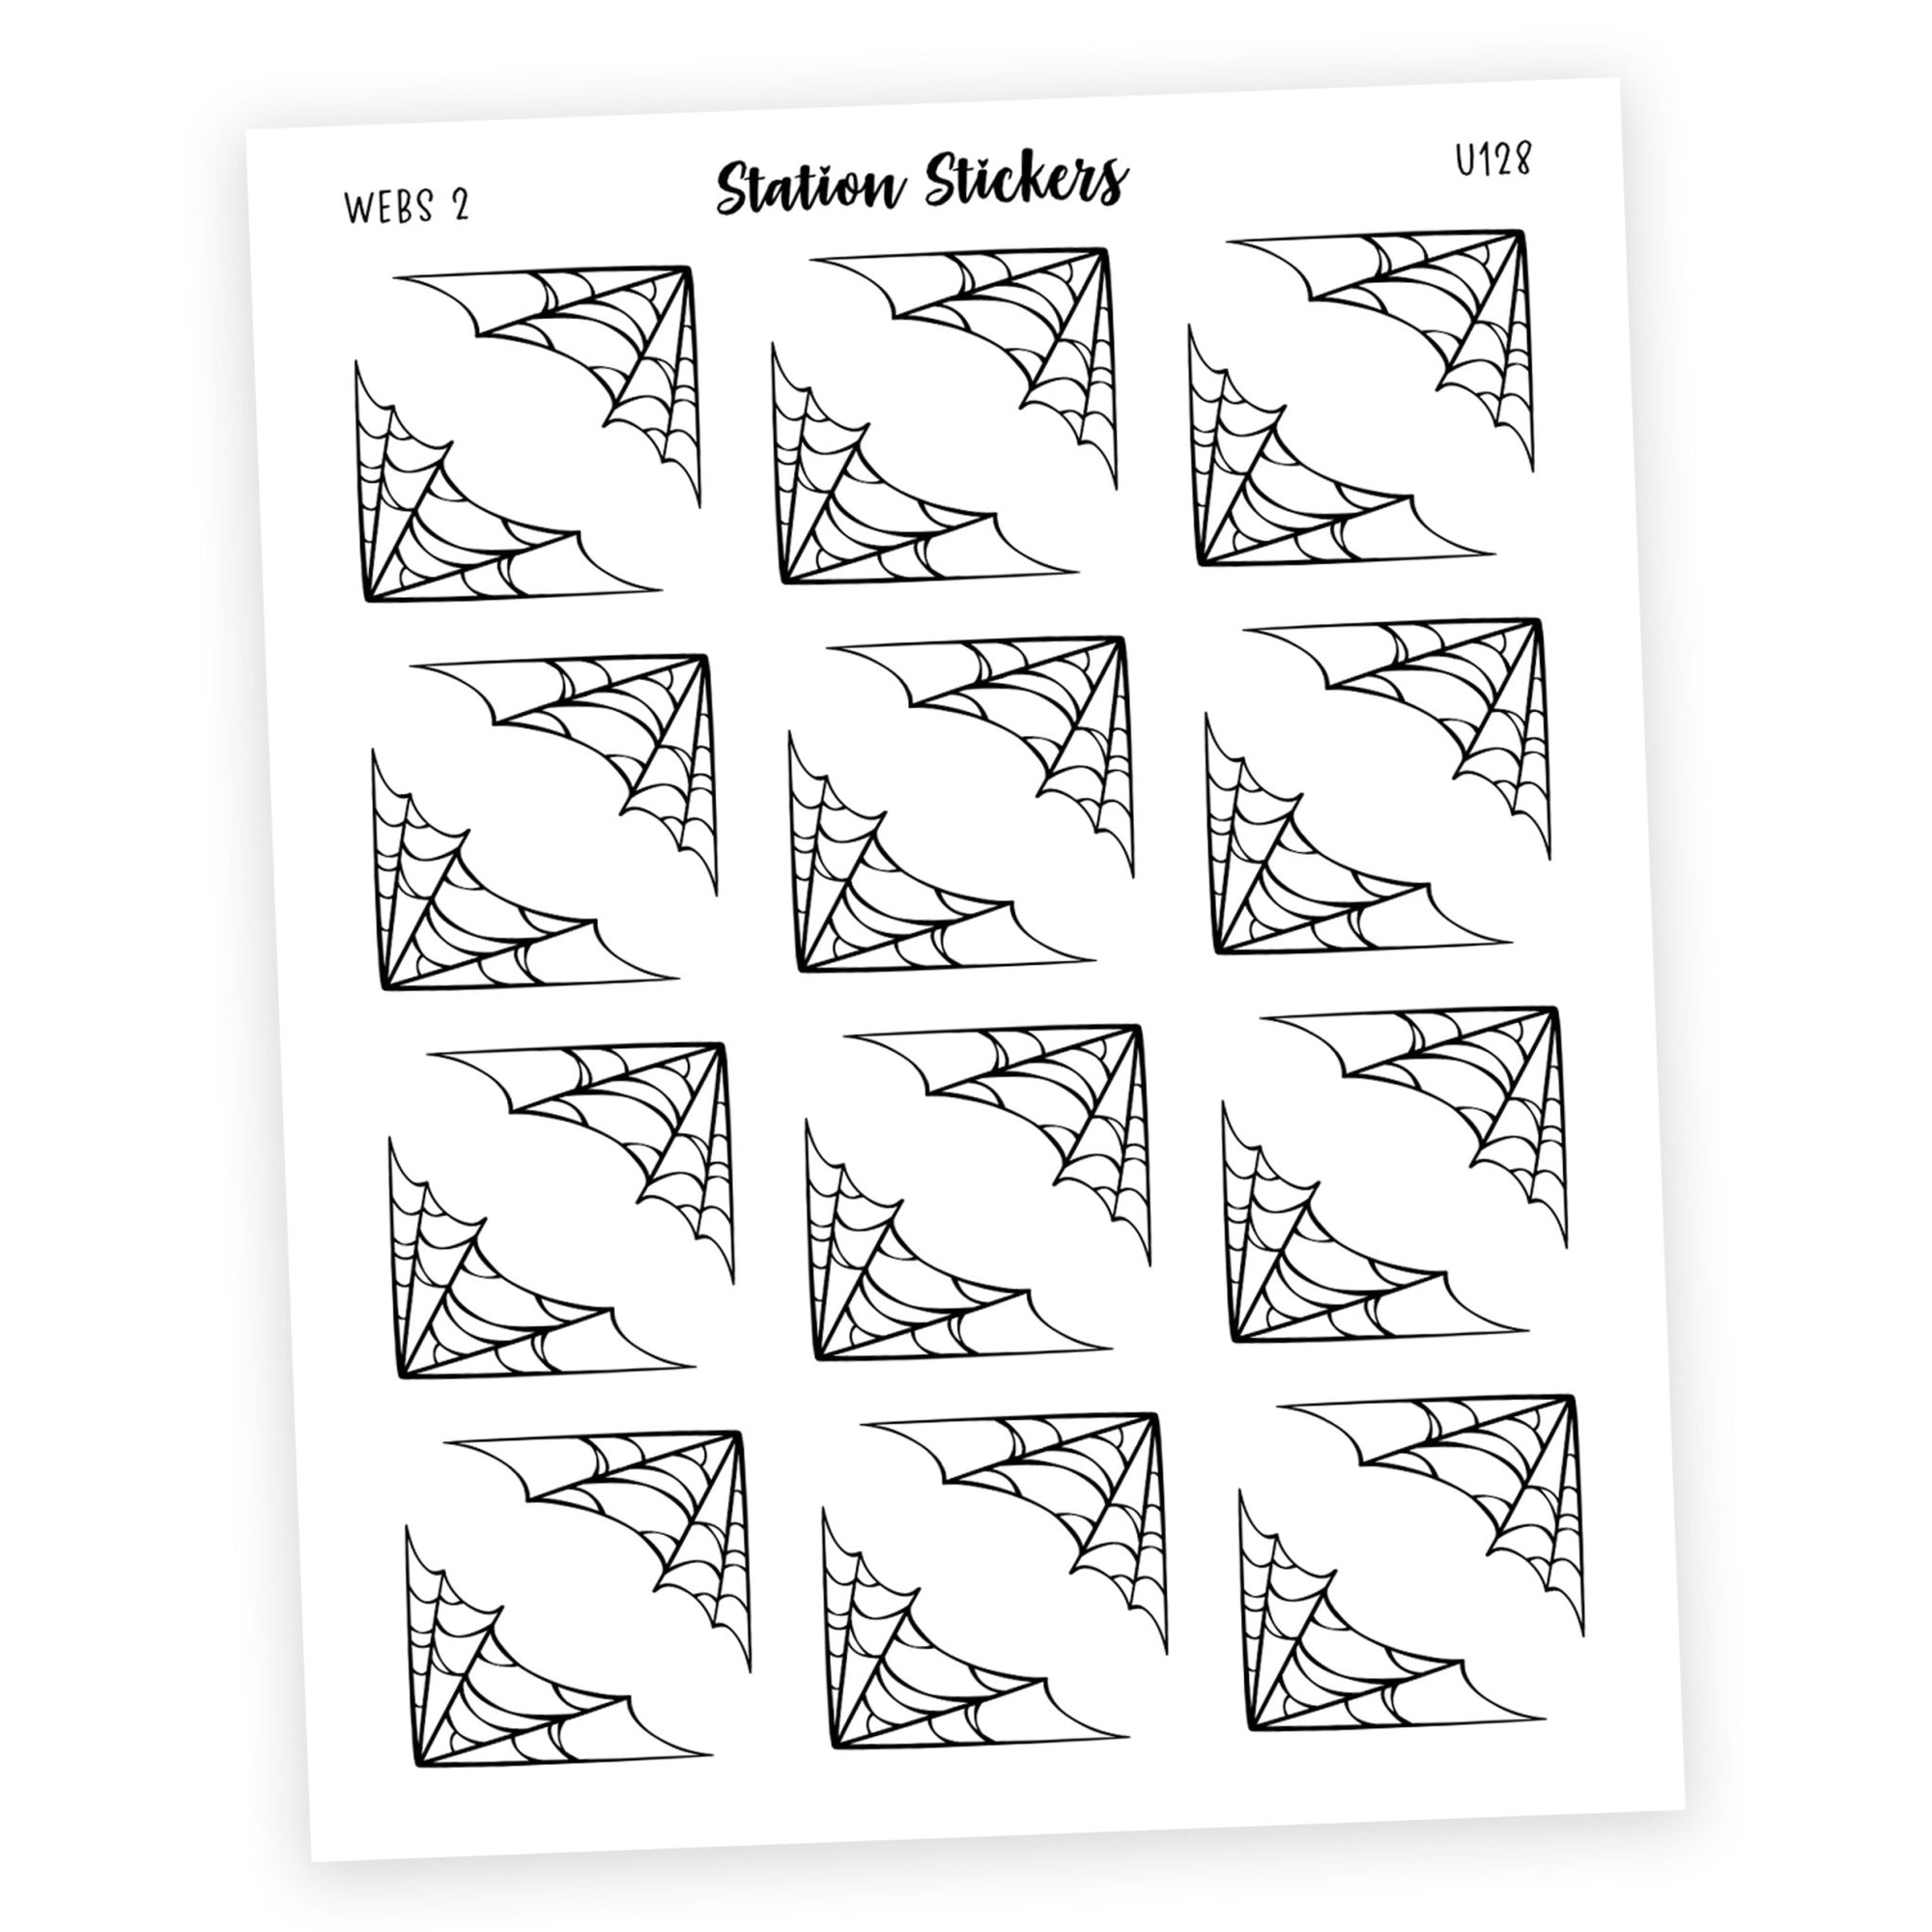 DECO • WEBS 2 - Station Stickers